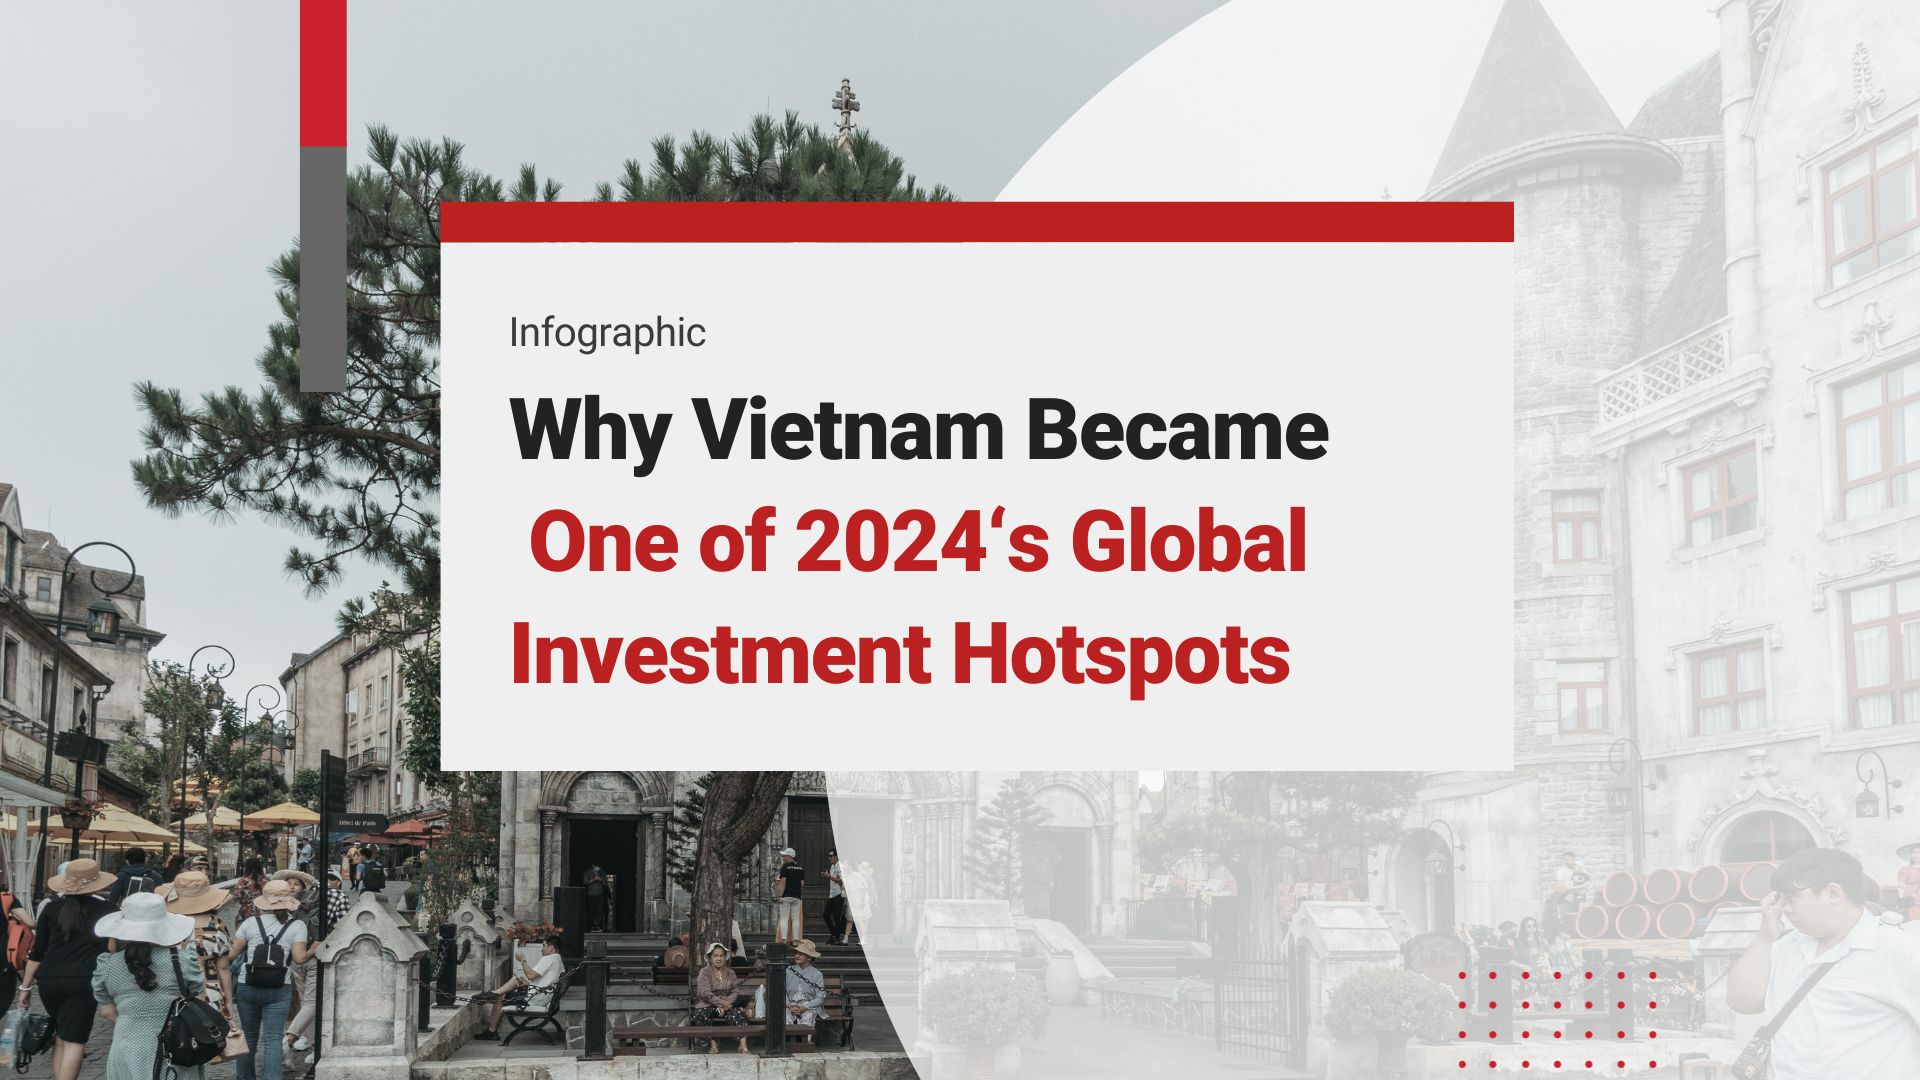 Why Vietnam Became One of 2024‘s Global Investment Hotspots